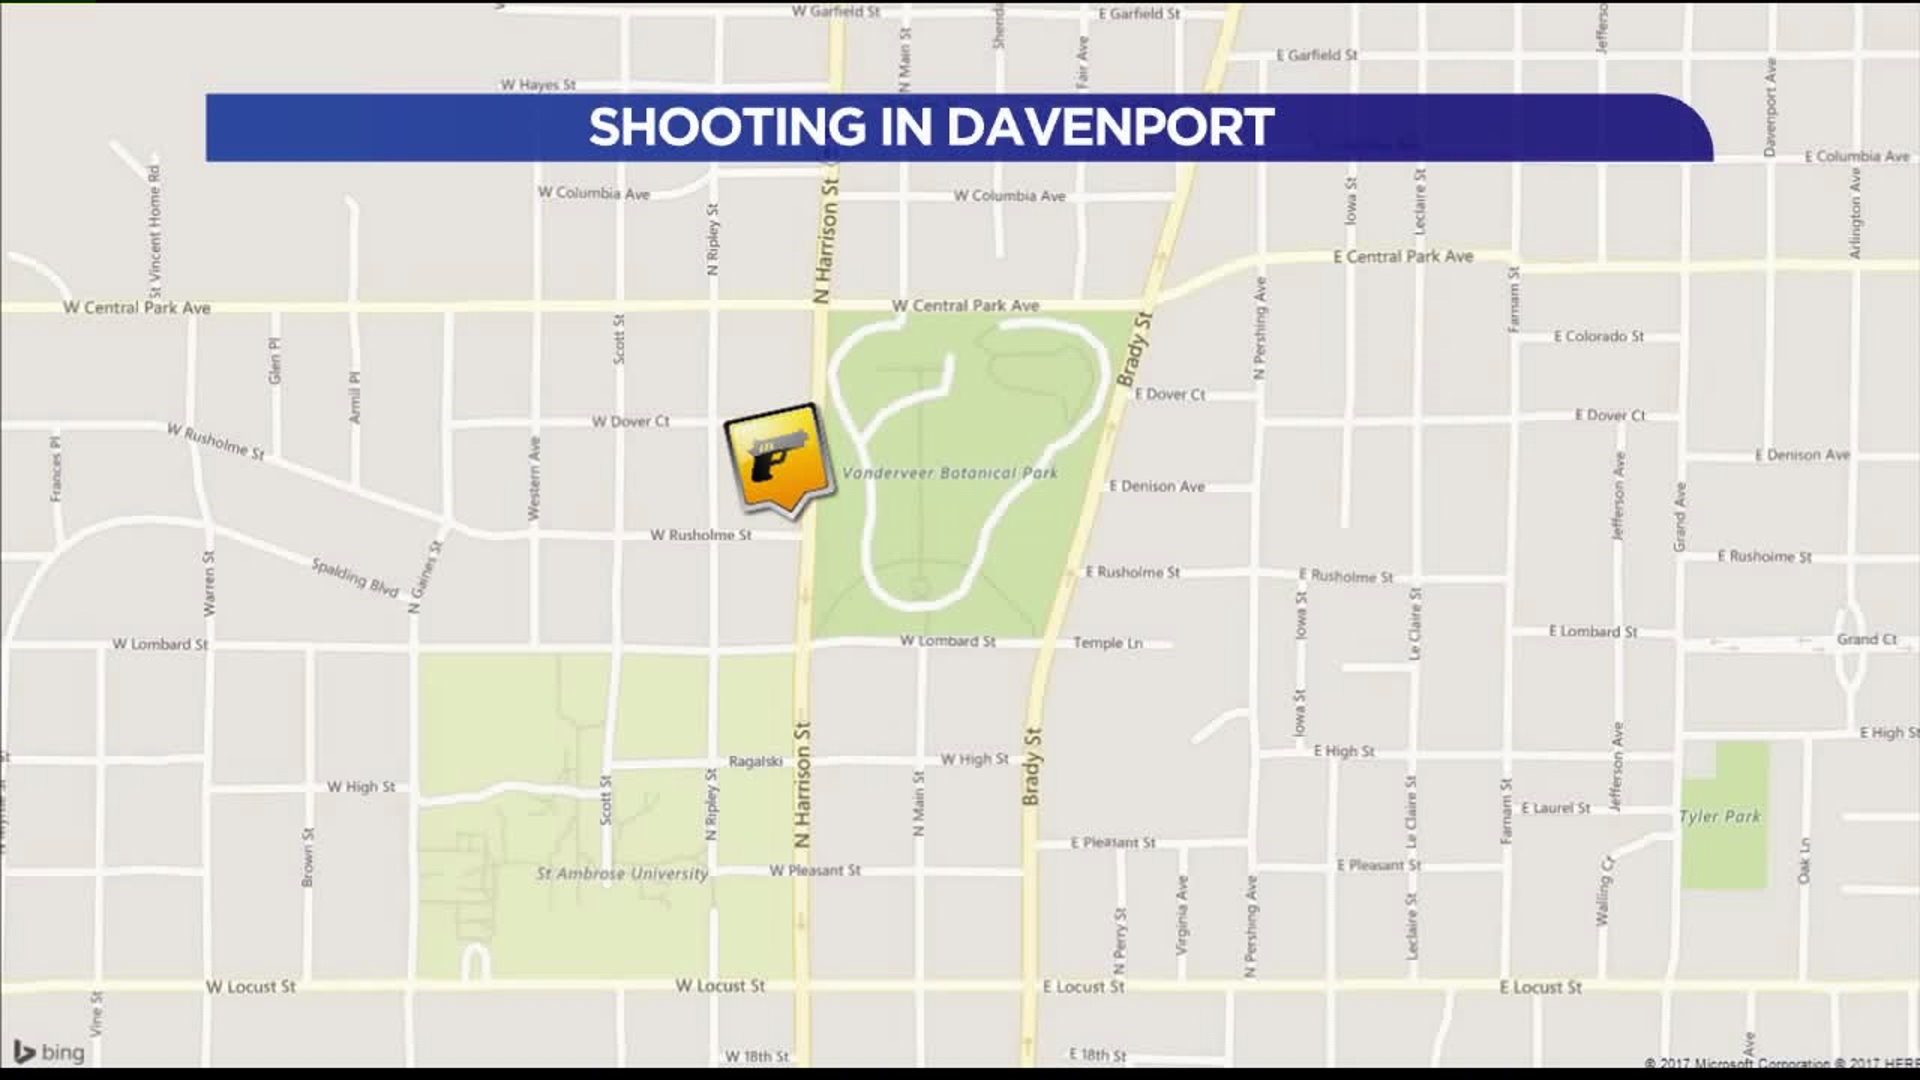 Shooting reported in Davenport